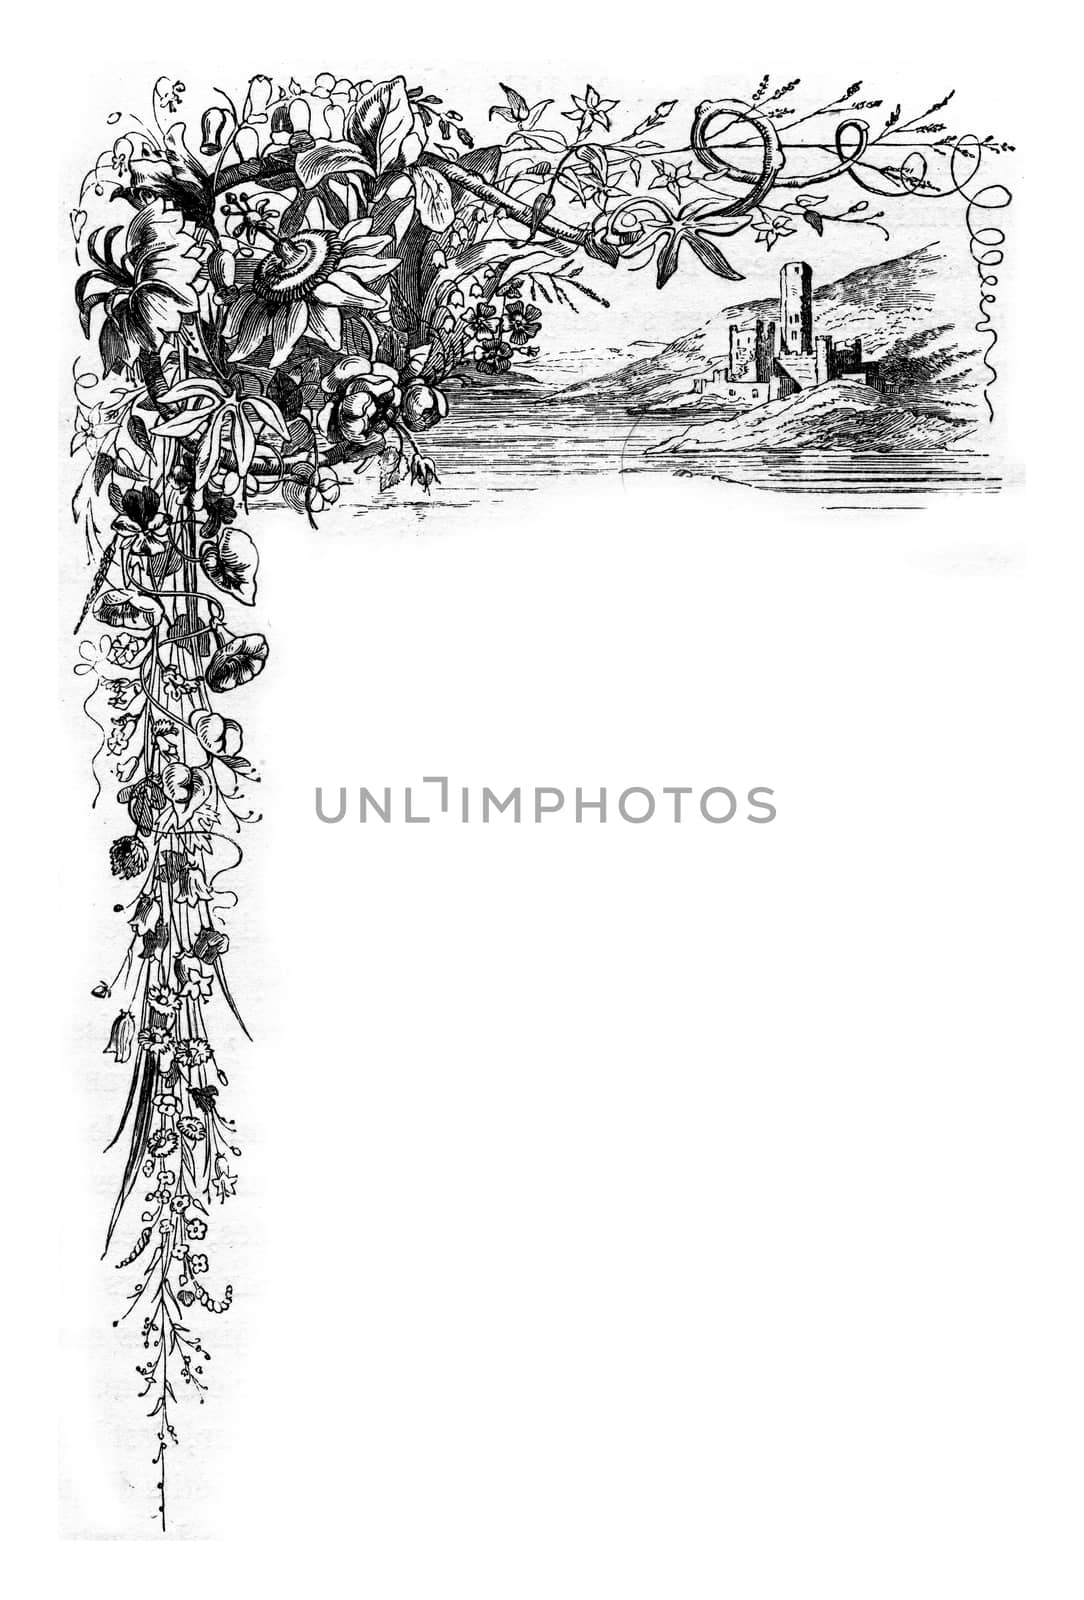 Floral chapter page design with castle by the water. From Chemin des Ecoliers, vintage engraving, 1876.
